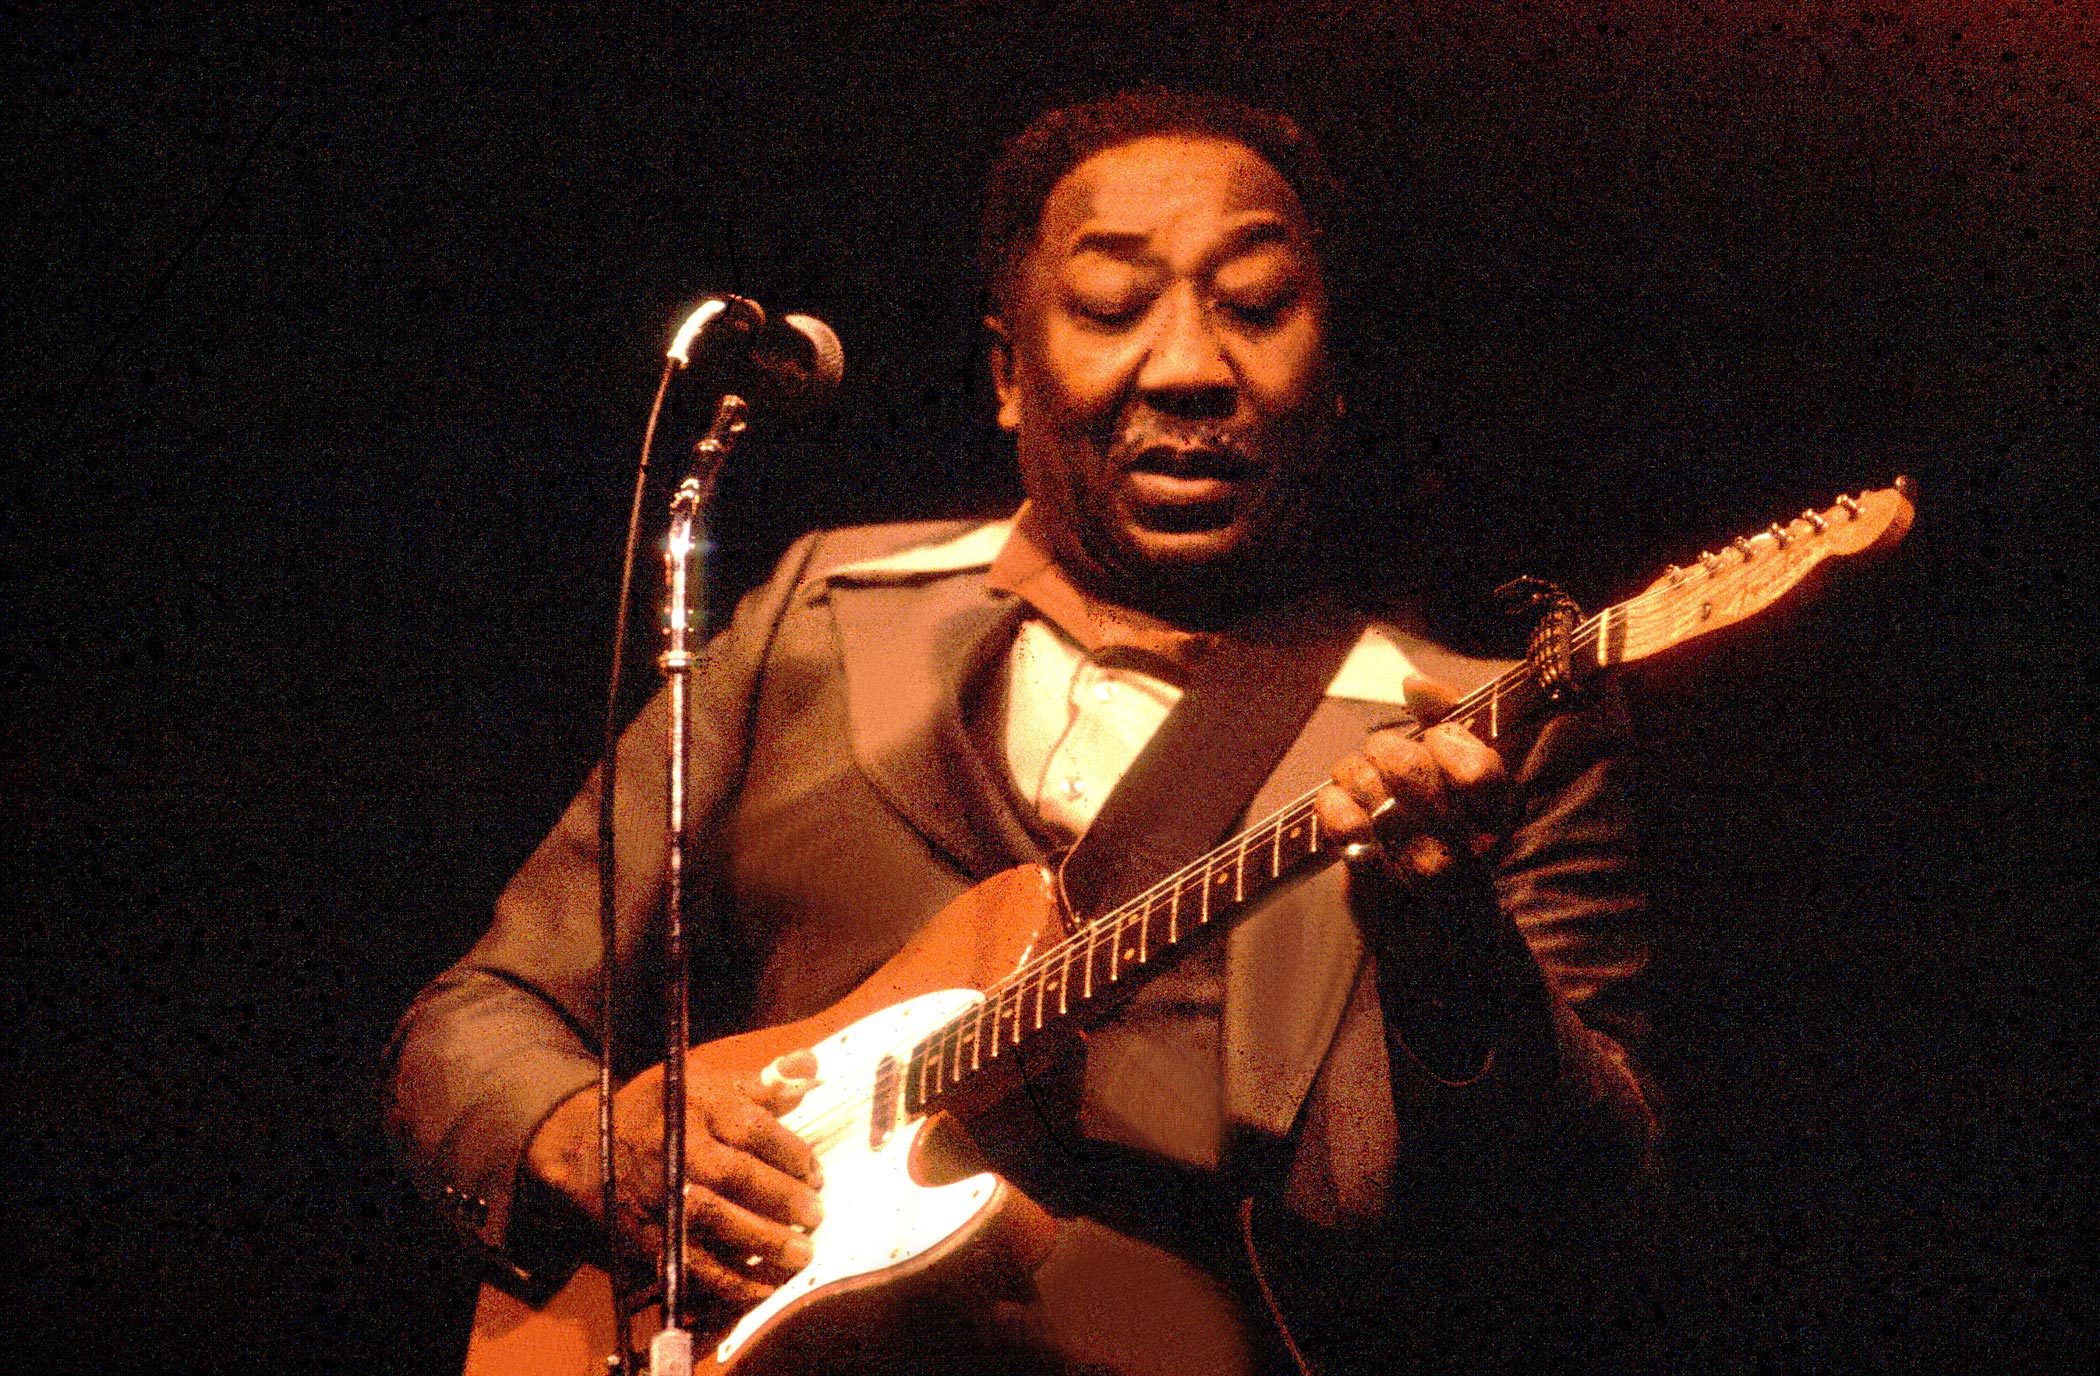 Muddy Waters Playing Guitar from The State of Sound at Navy Pier